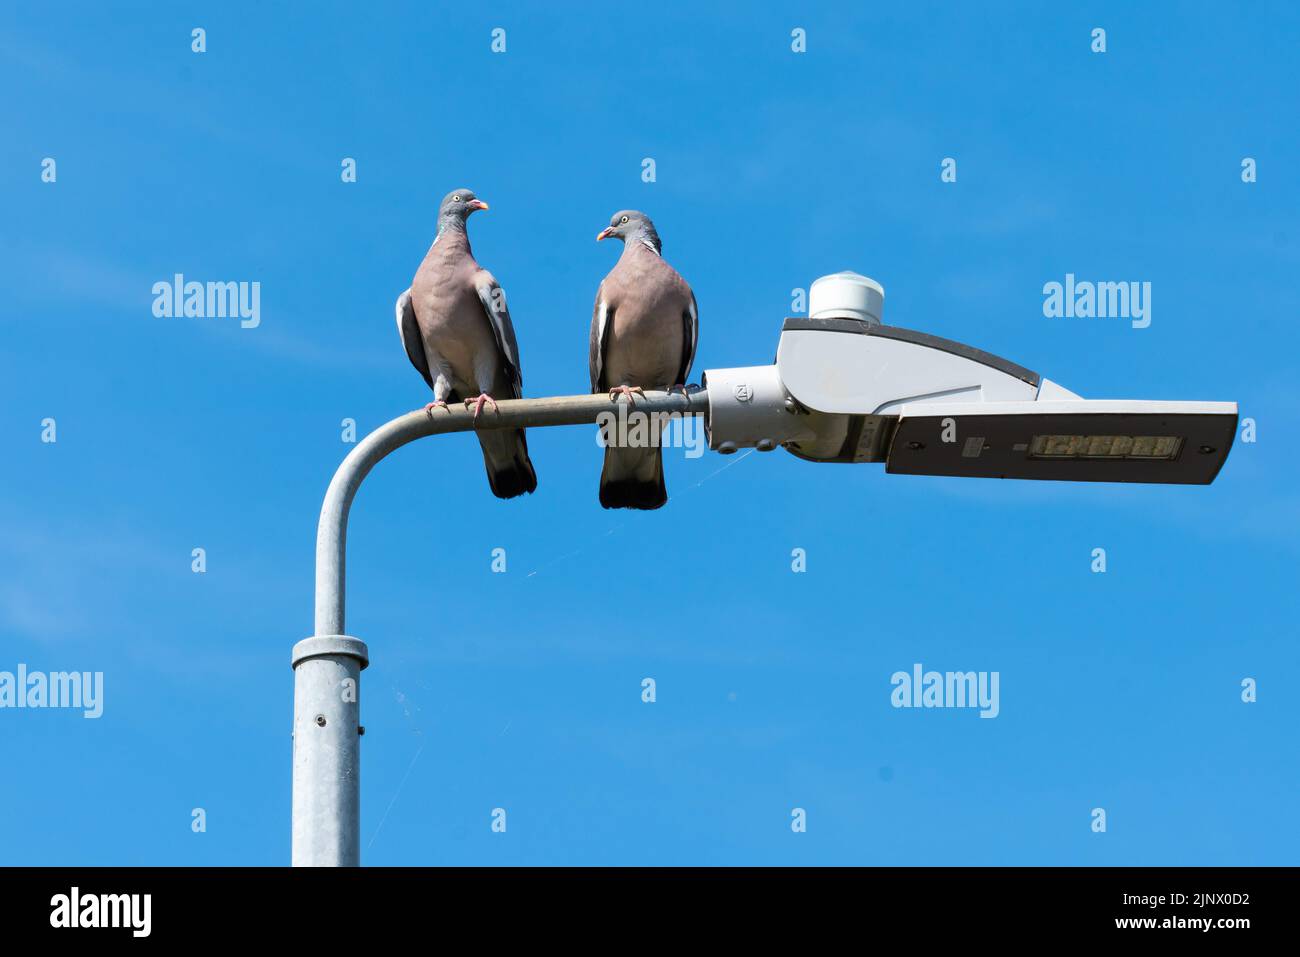 Columbidae, pigeons, doves, domestic pigeon, domesticated, highly intelligent, homing birds, common, unwanted sight, roosting, rooftops, streetlights. Stock Photo